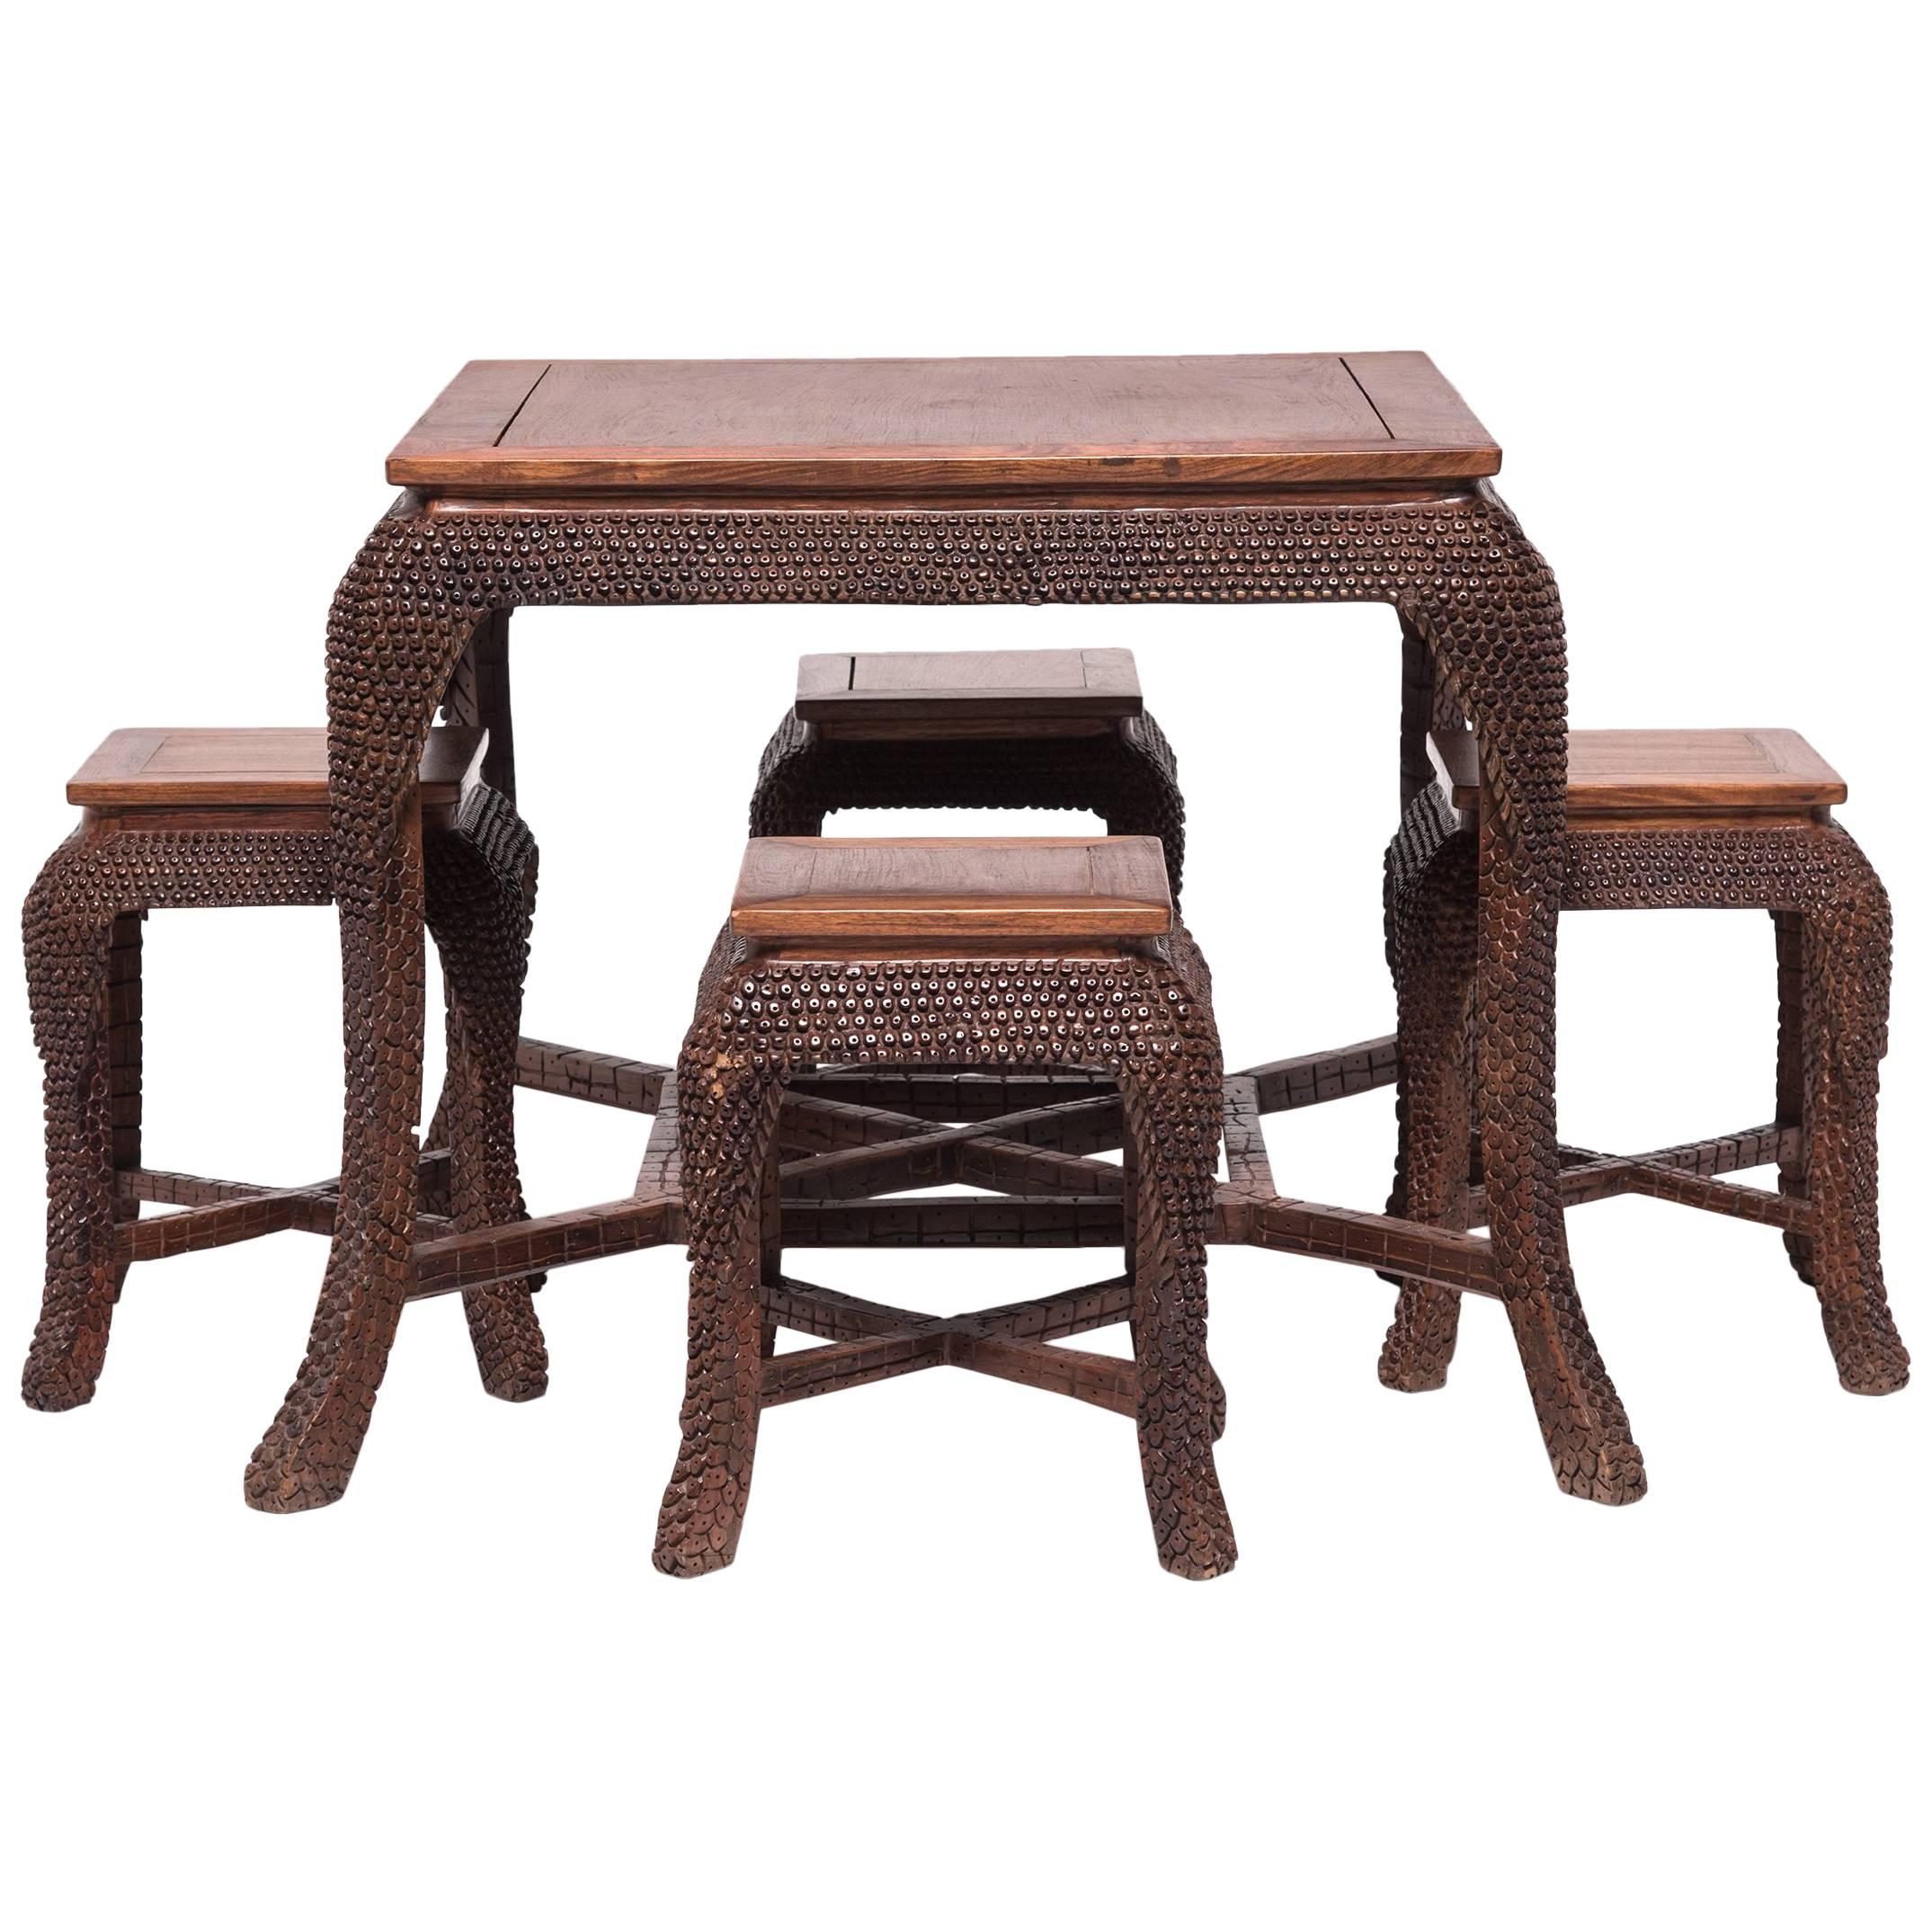 Chinese Dragon Scale Tea Table and Stools